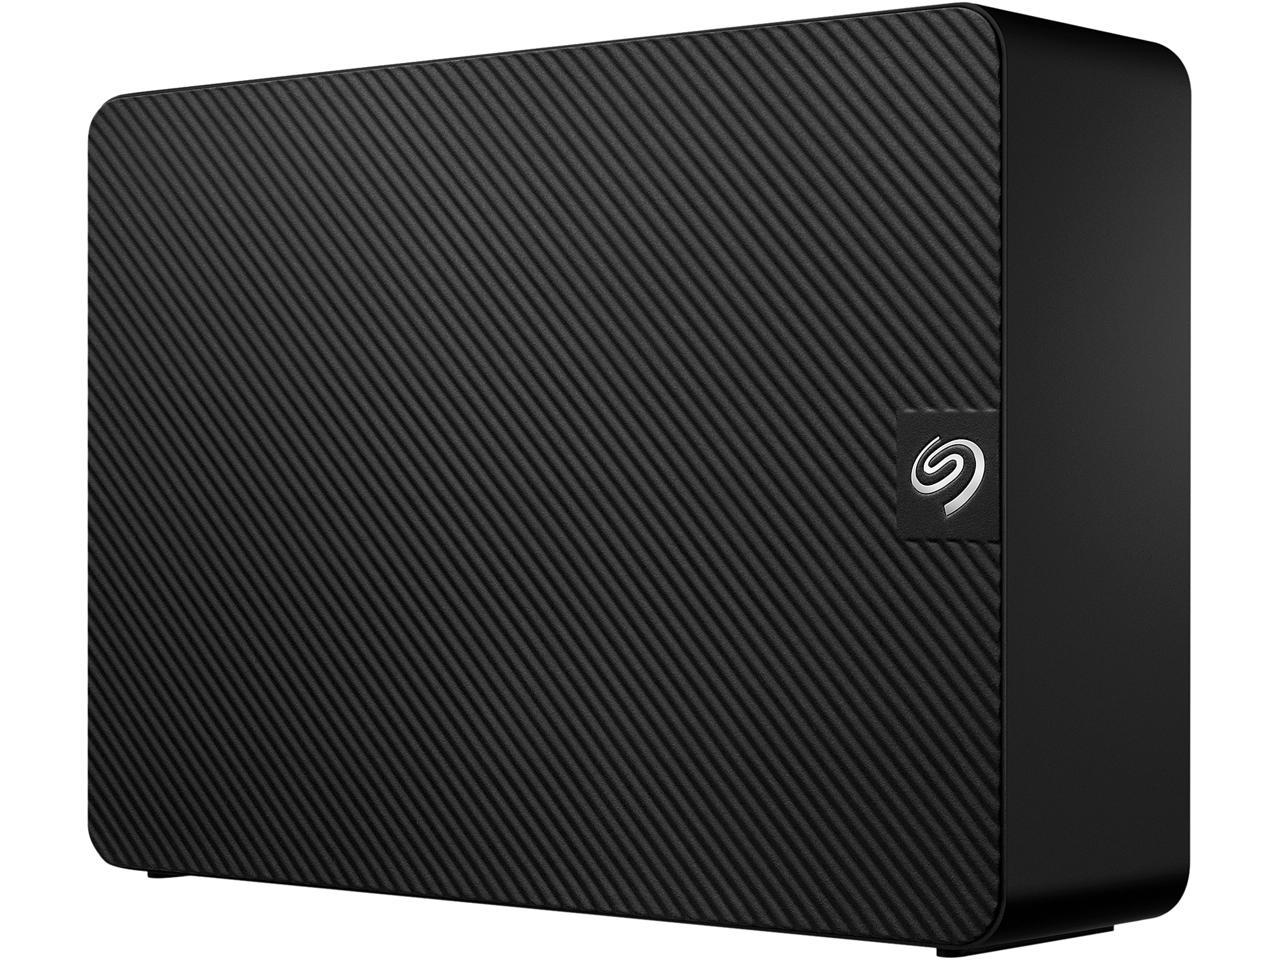 16TB Seagate Expansion External Hard Drive with Rescue Data Recovery Services $230